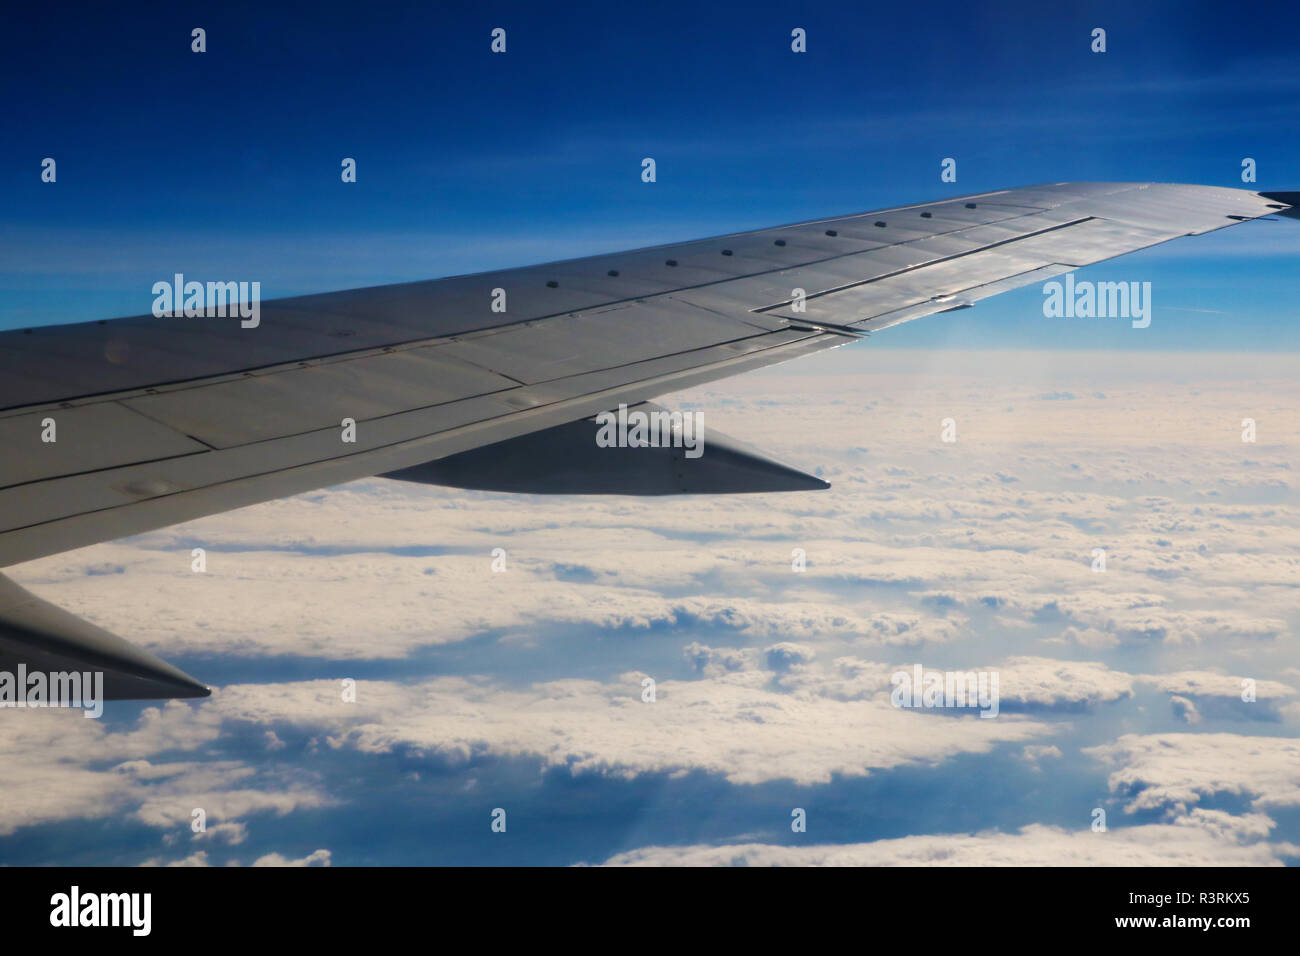 Seeing the plane's wing and the outer view from the window Stock Photo